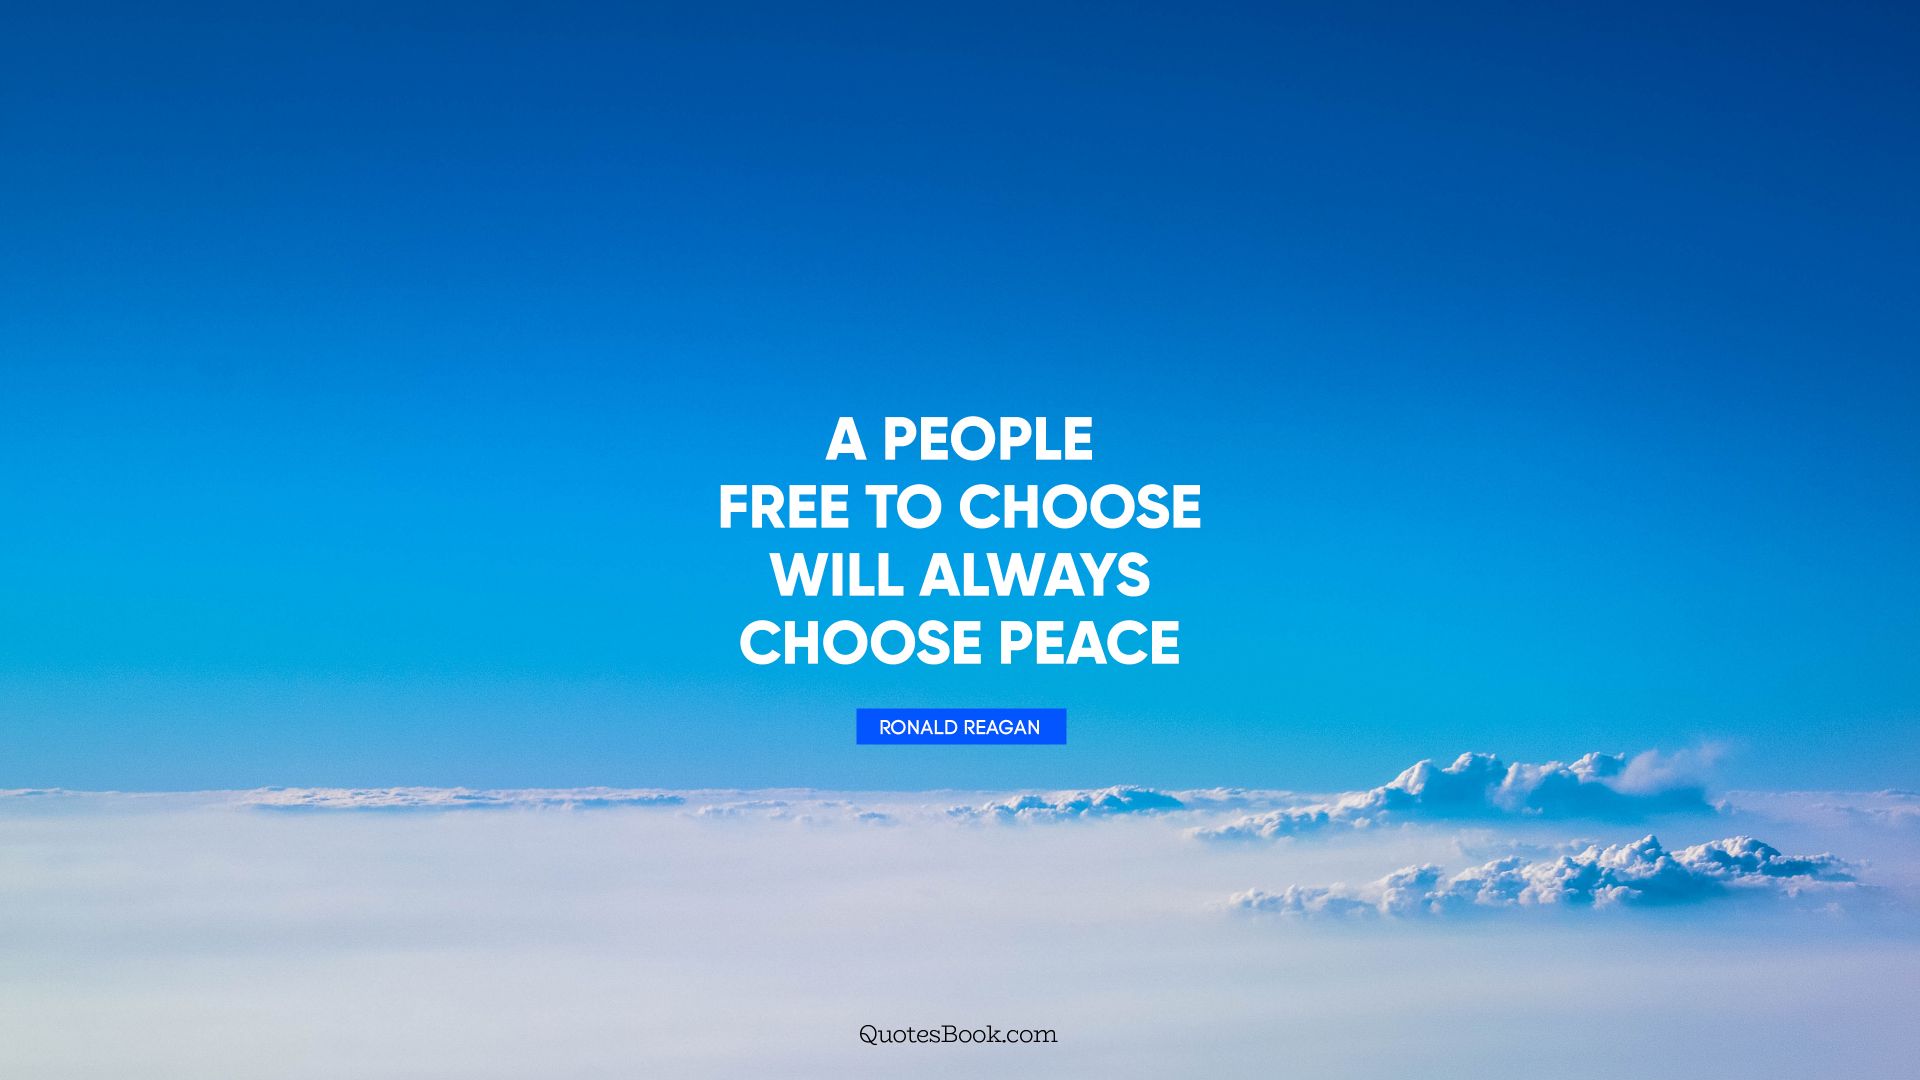 A people free to choose will always choose peace. - Quote by Ronald Reagan